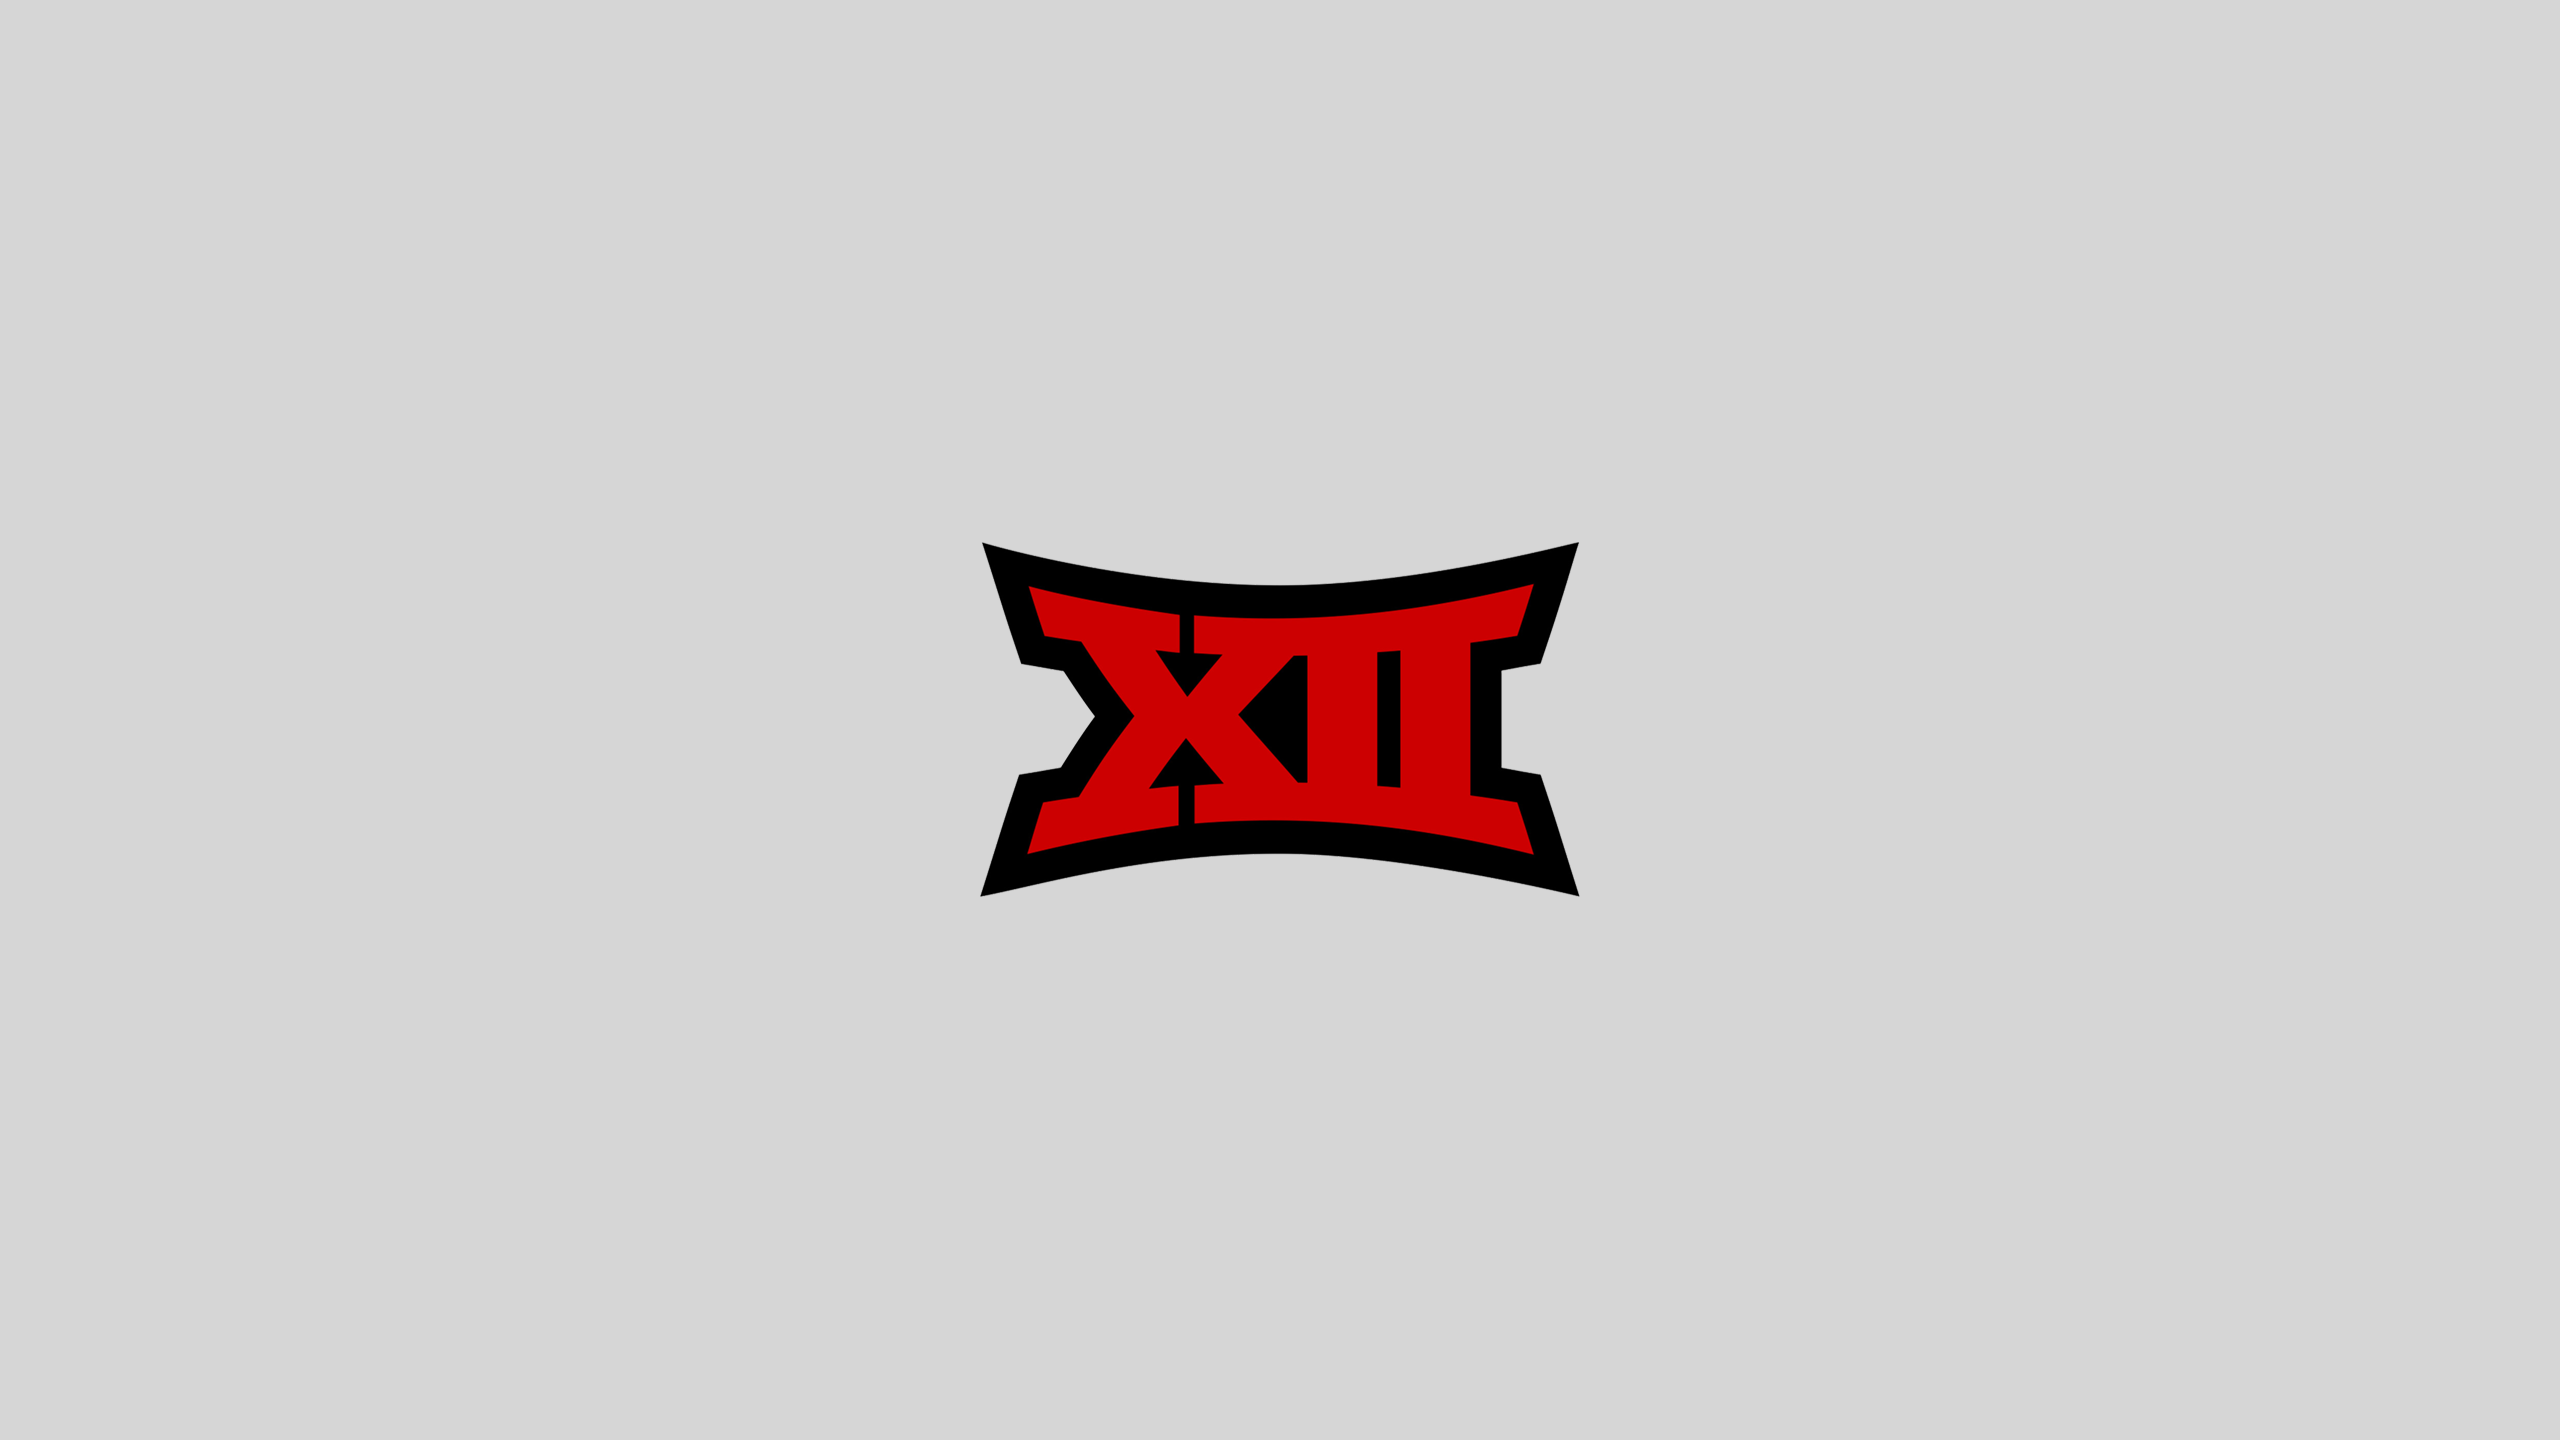 Big 12 Conference Football - NCAAF - Square Bettor